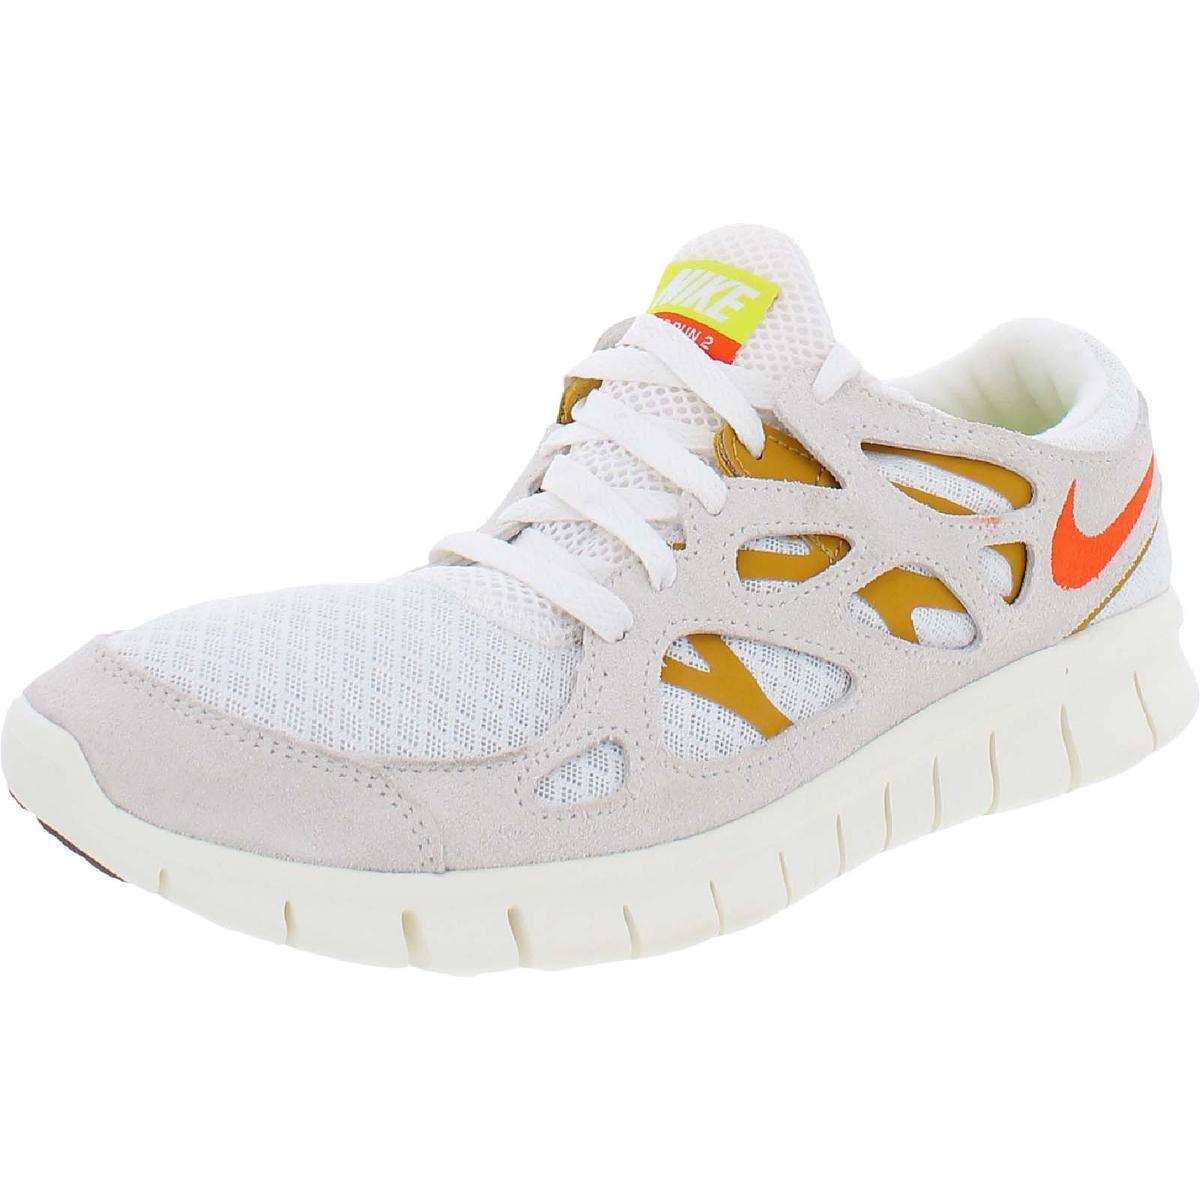 Nike Womens Suede Fitness Trainers Running Shoes Sneakers Bhfo 9239 Beige/Tan